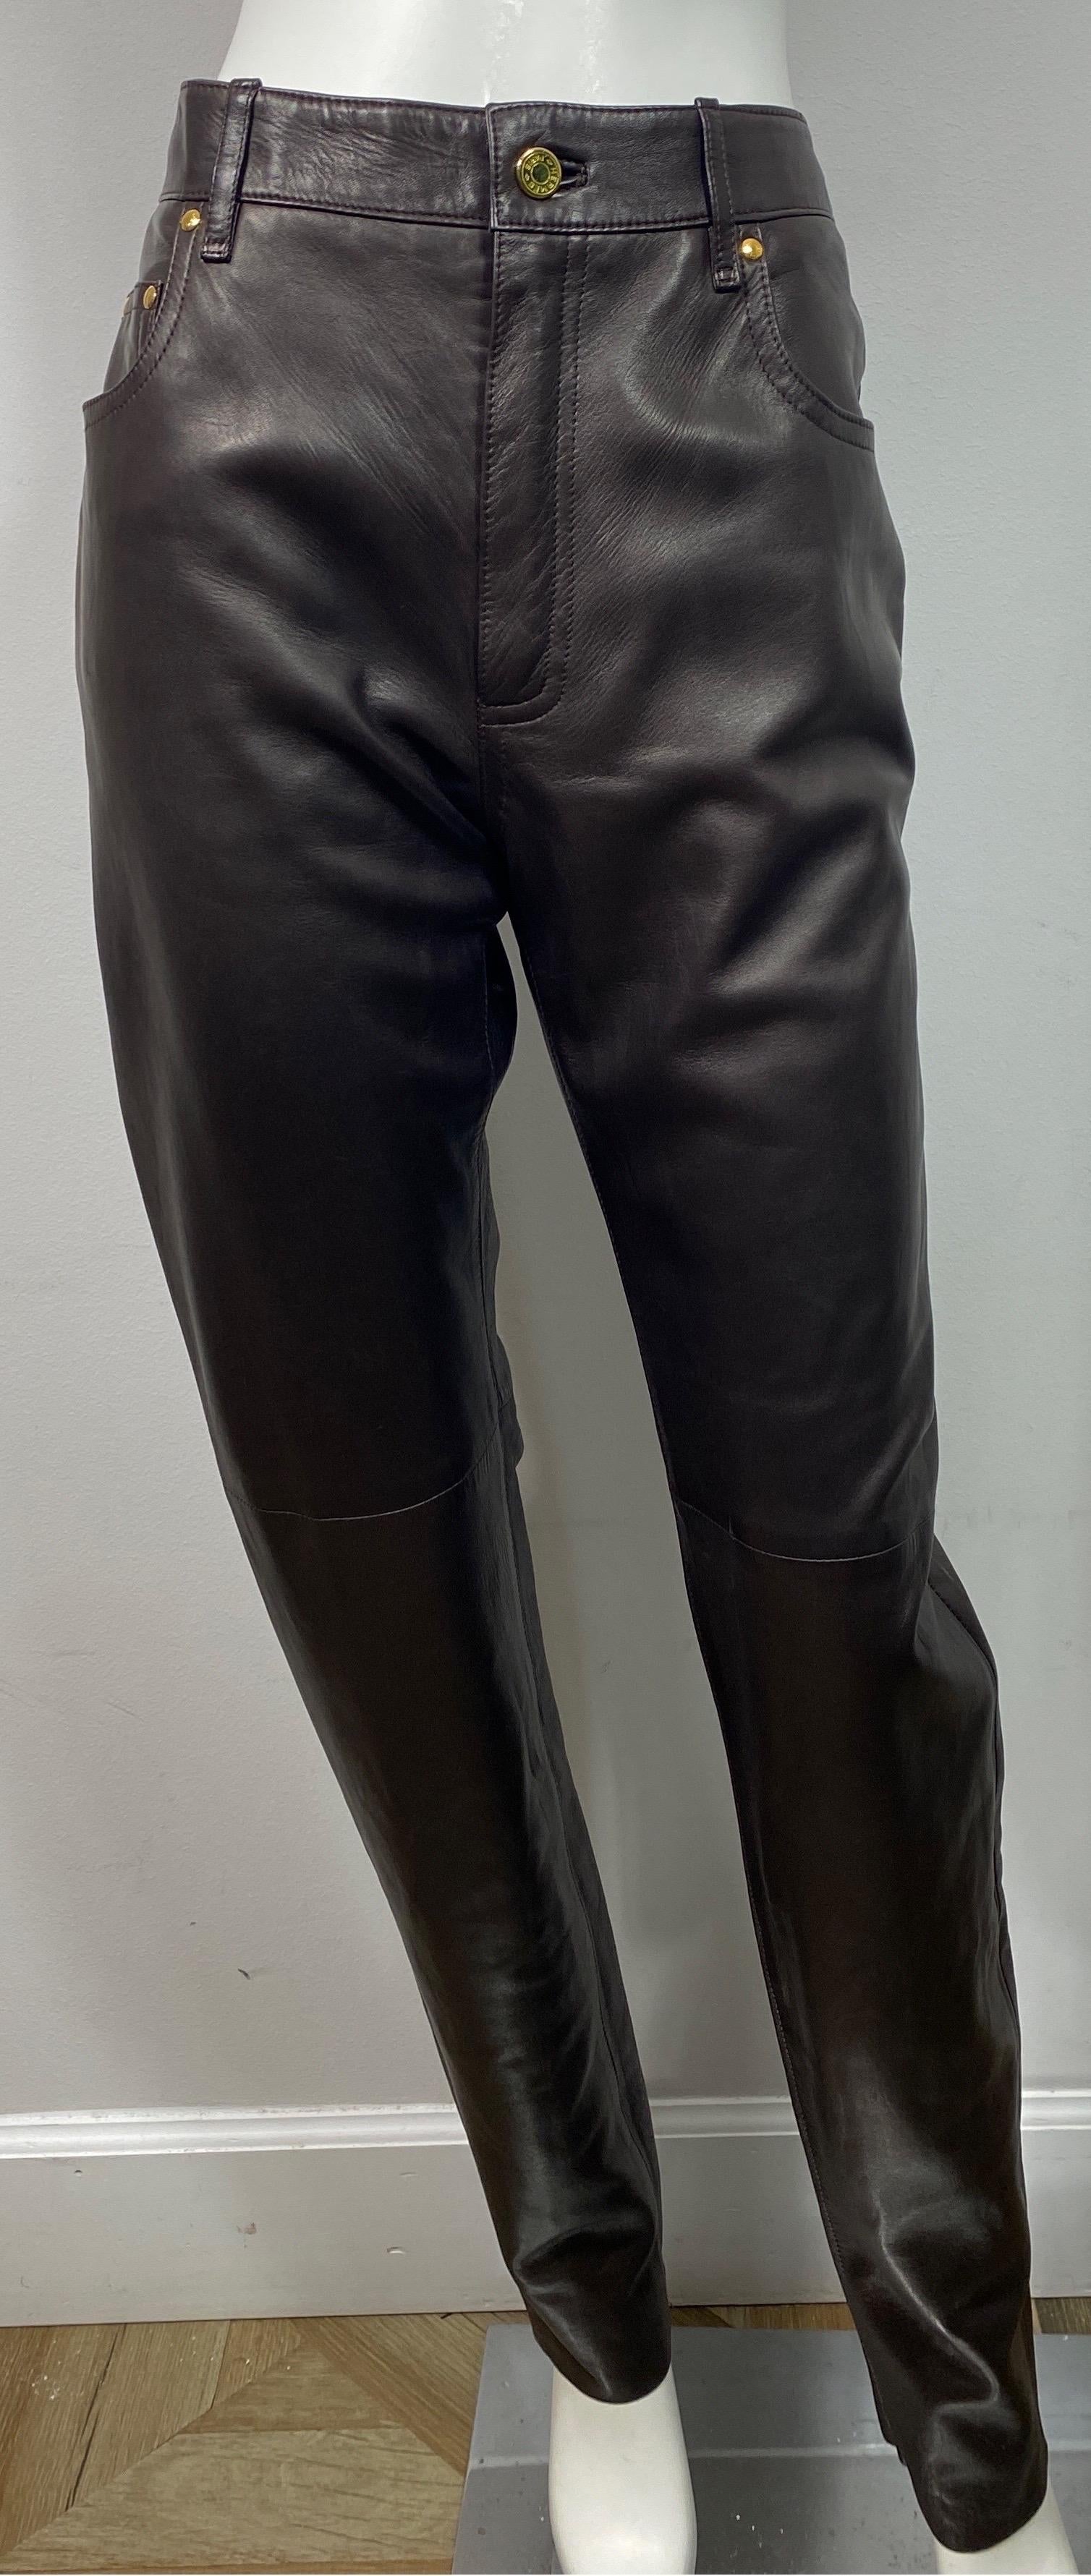 Hermes 1990’s Vintage Chocolate Brown Jean Style Leather Pants - Size 42  These EXTREMELY RARE vintage leather pants by Hermes are a treasure find. The pants are made of the finest lambskin leather, are a jean style cut, high waisted, 6” by 6”